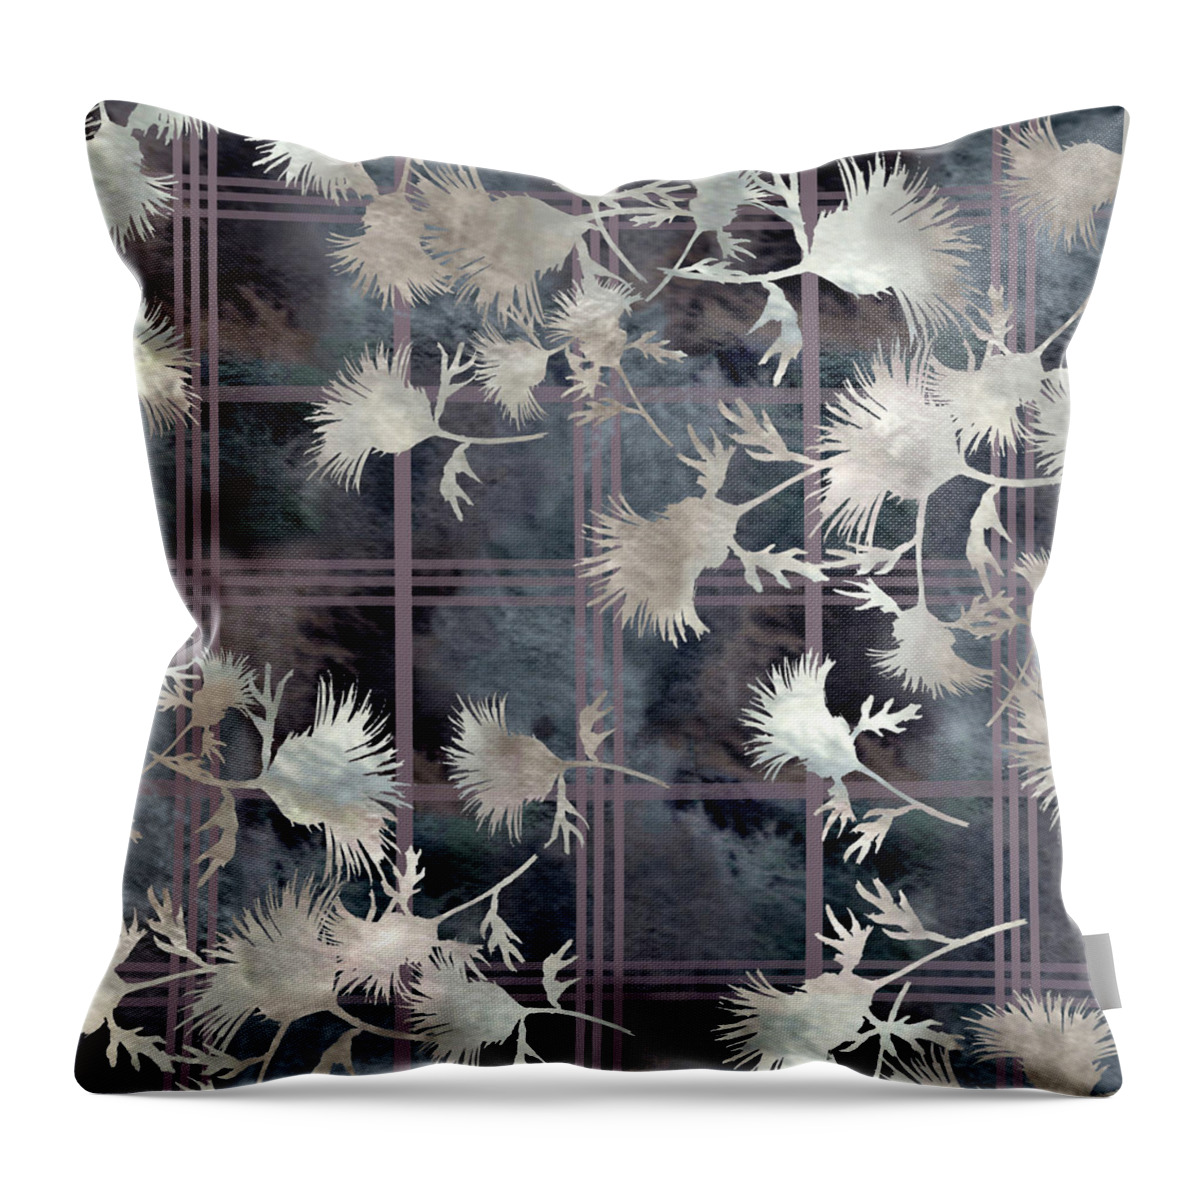 Thistle Throw Pillow featuring the digital art Thistle Plaid by Sand And Chi